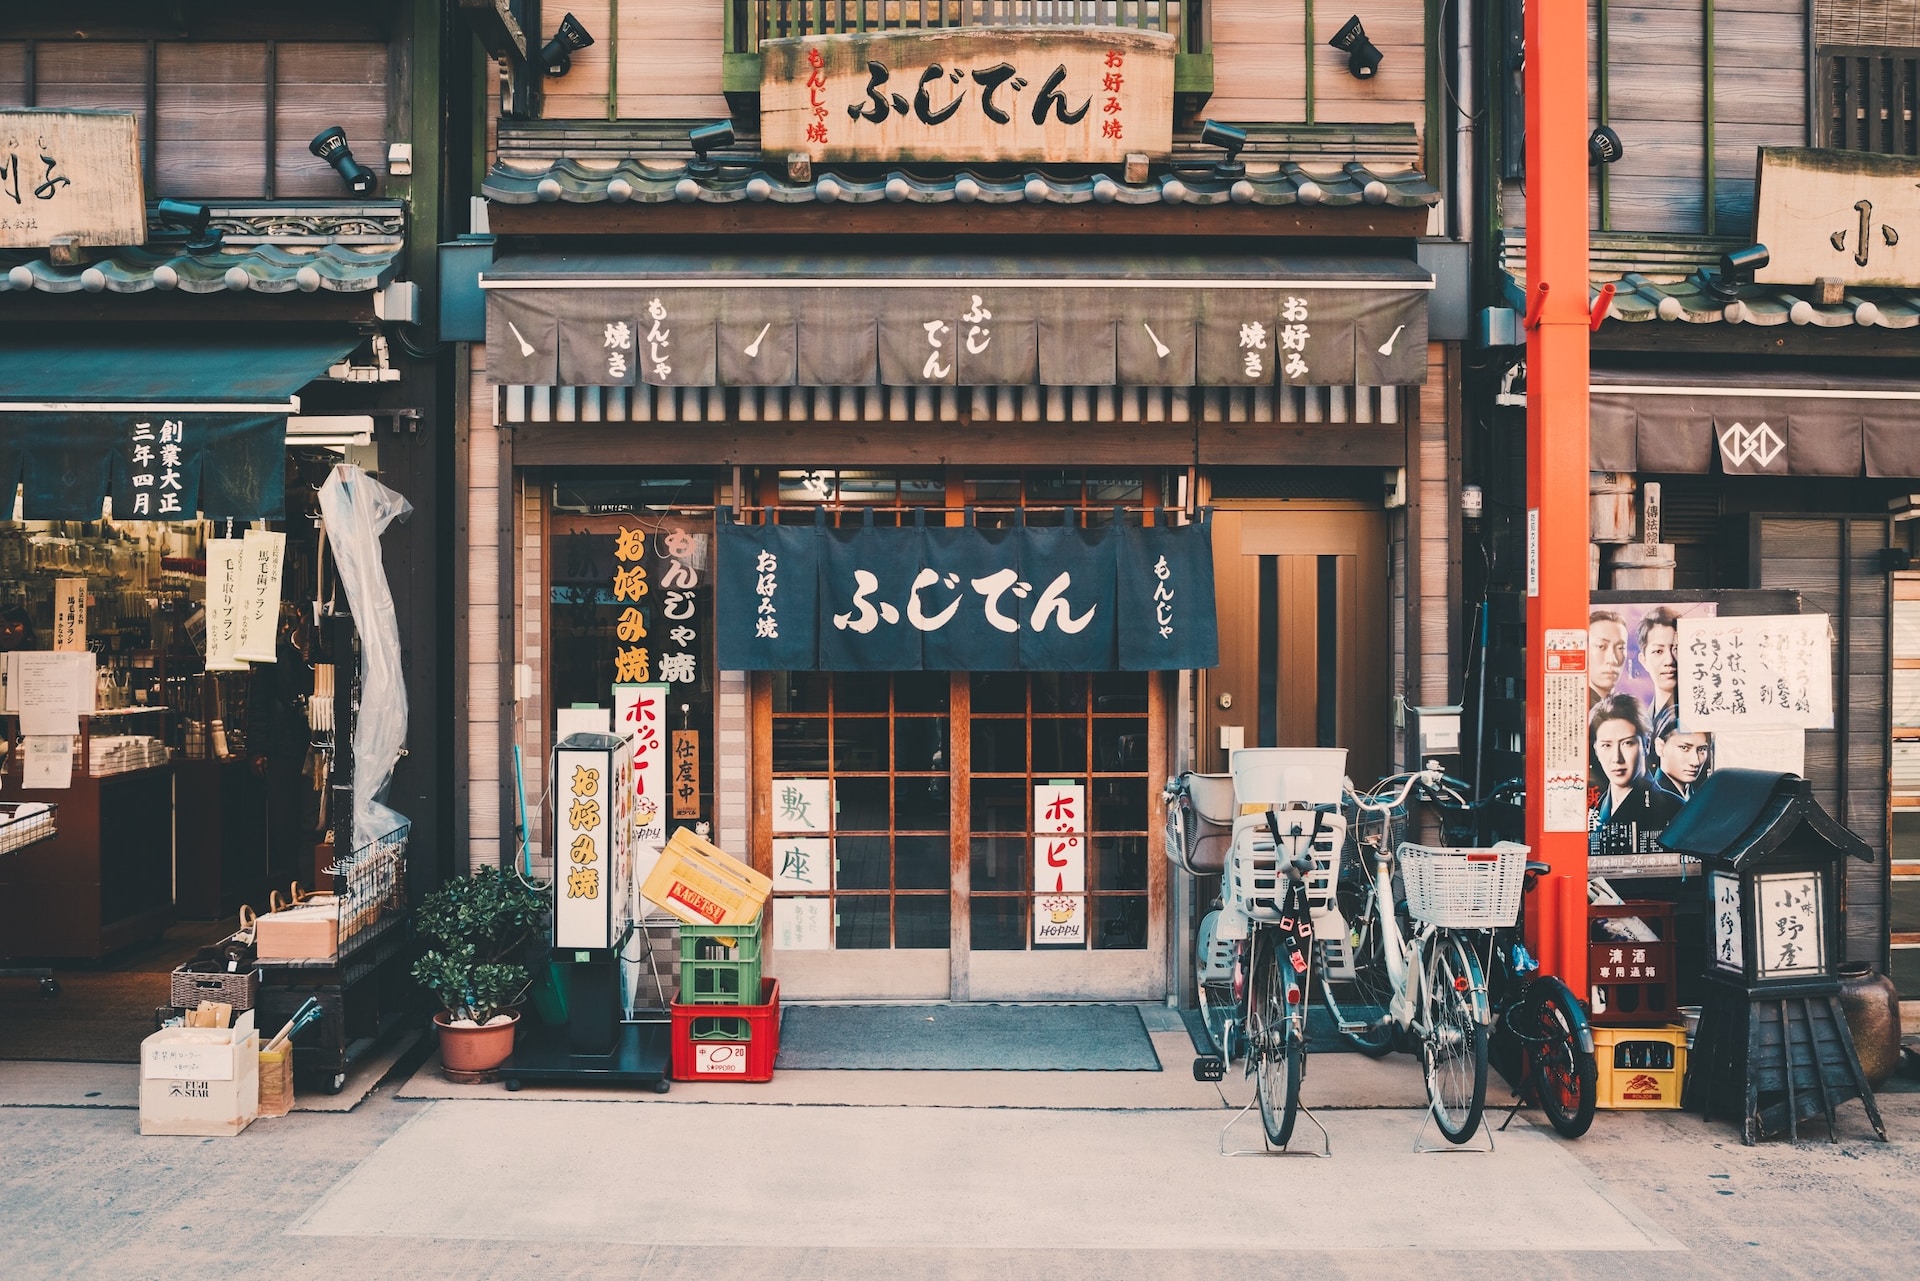 Tokyo Photo by Clay Banks on Unsplash